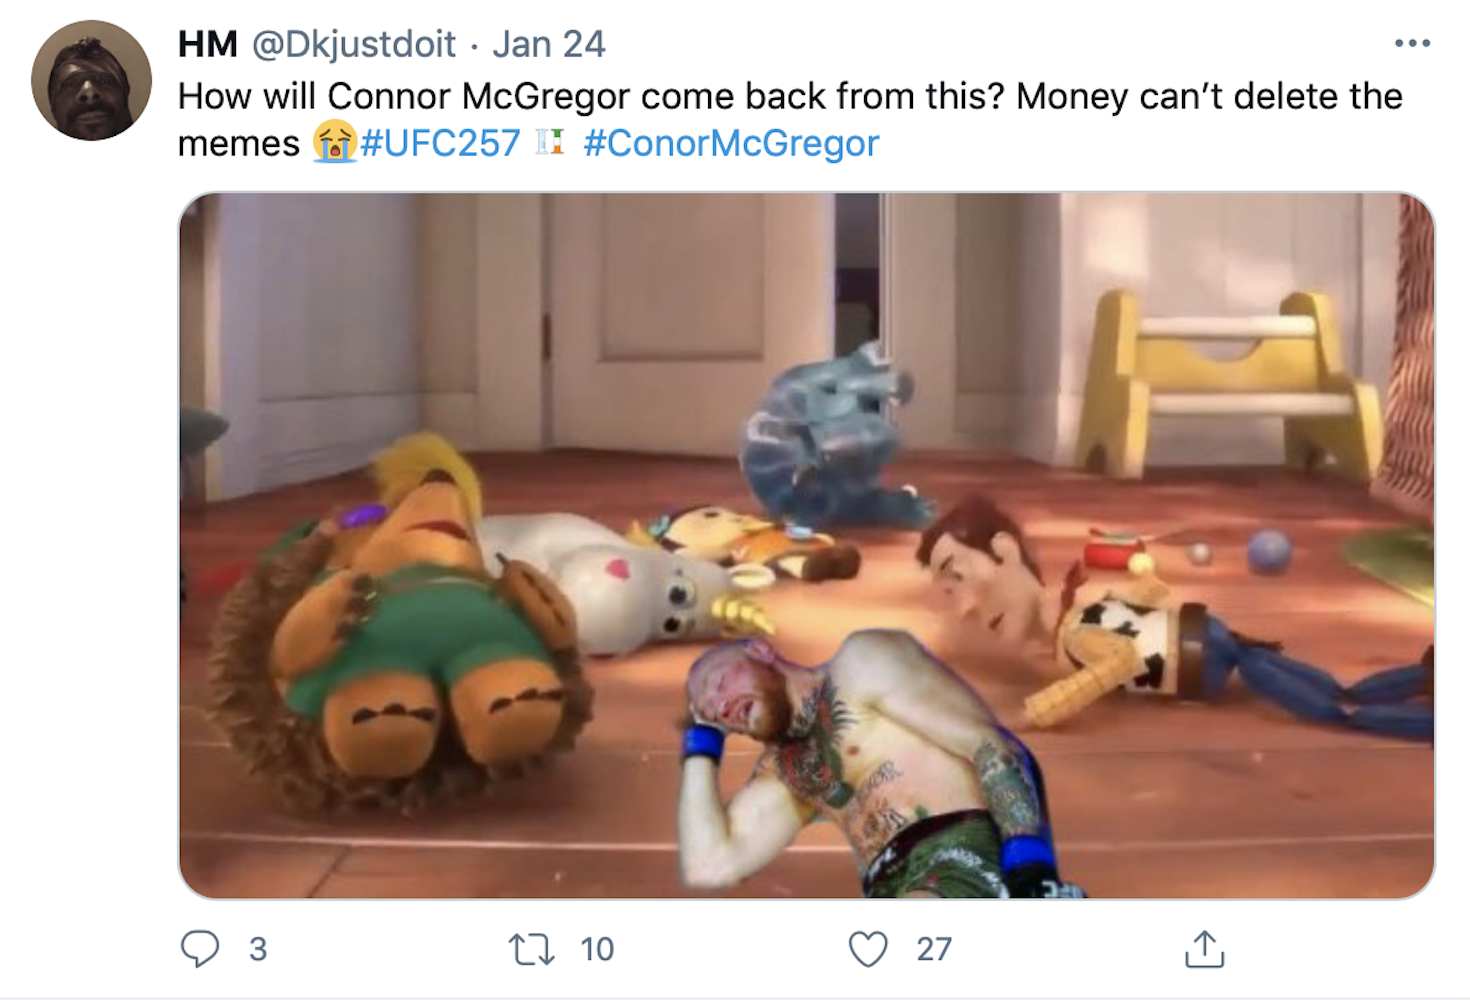 "How will Connor McGregor come back from this? Money can’t delete the memes 😭#UFC257 #ConorMcGregor" McGregor photoshopped into a scene from Toy Story where Woody the cowboy doll and some other toys are scattered on the floor